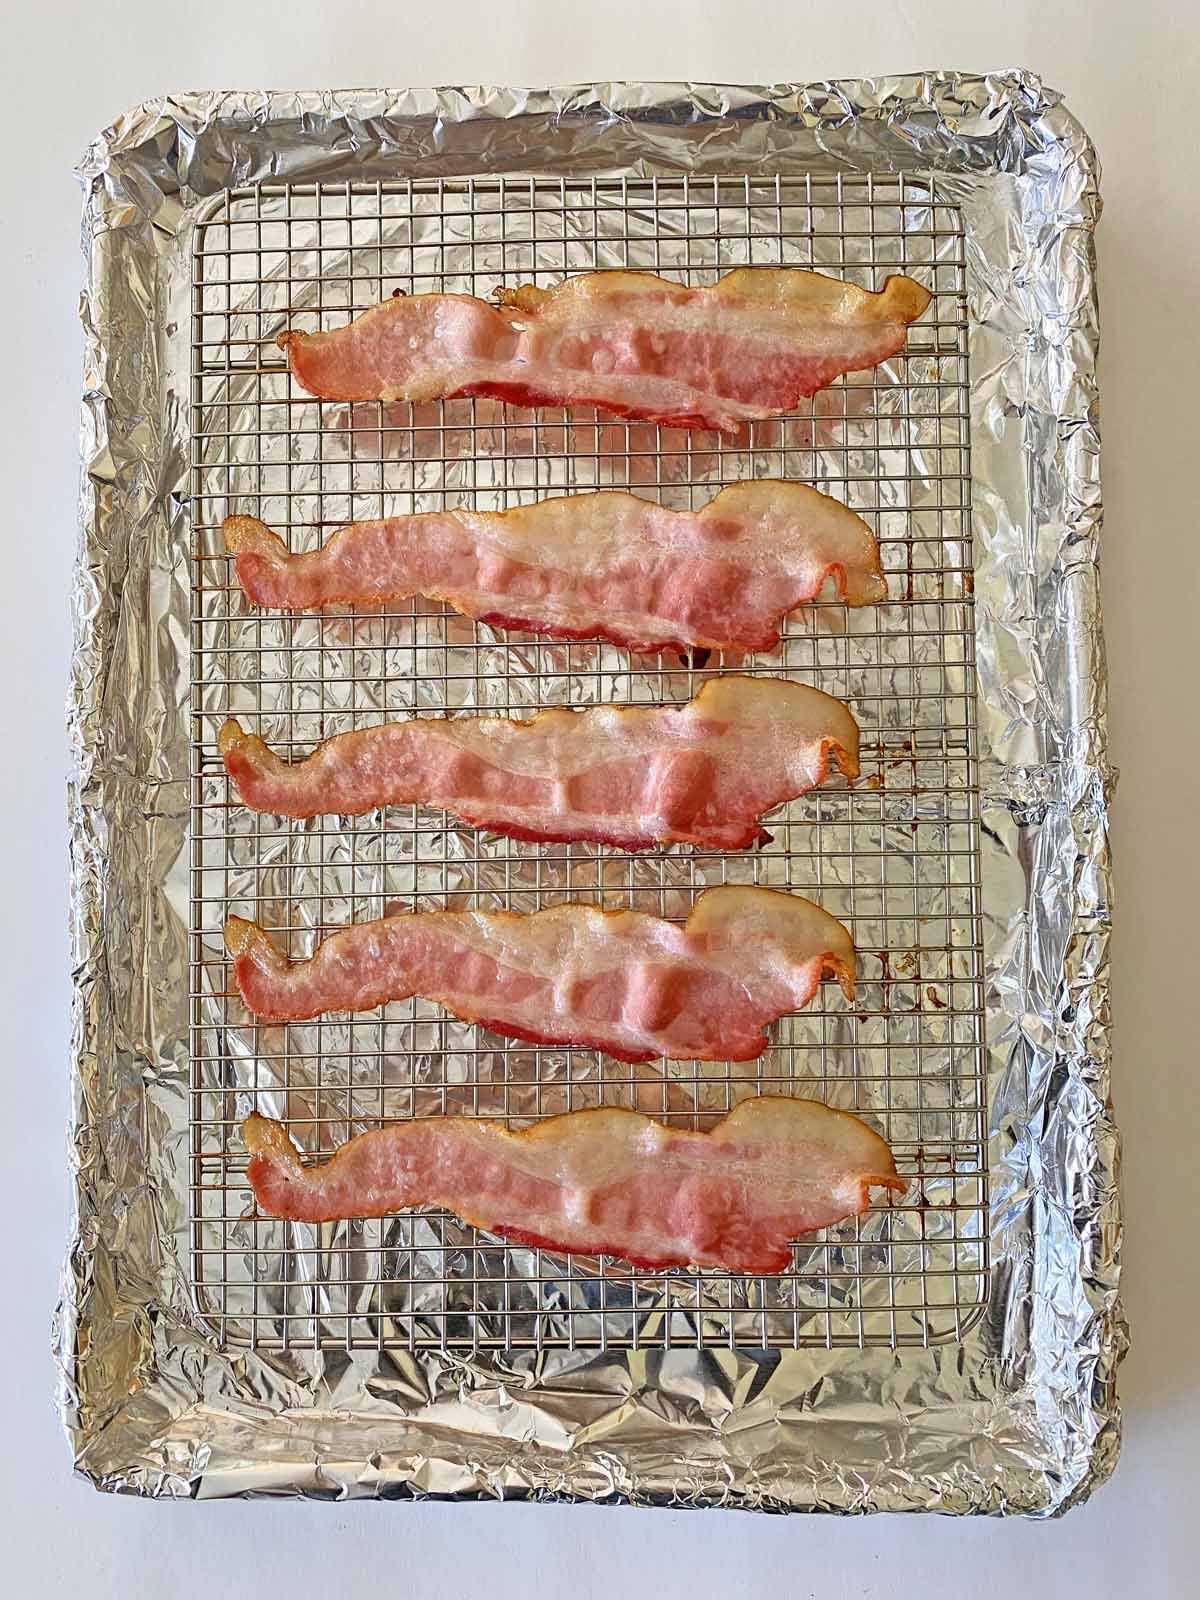 Six slices of partially cooked bacon on a wire rack atop a foil-lined baking sheet. 